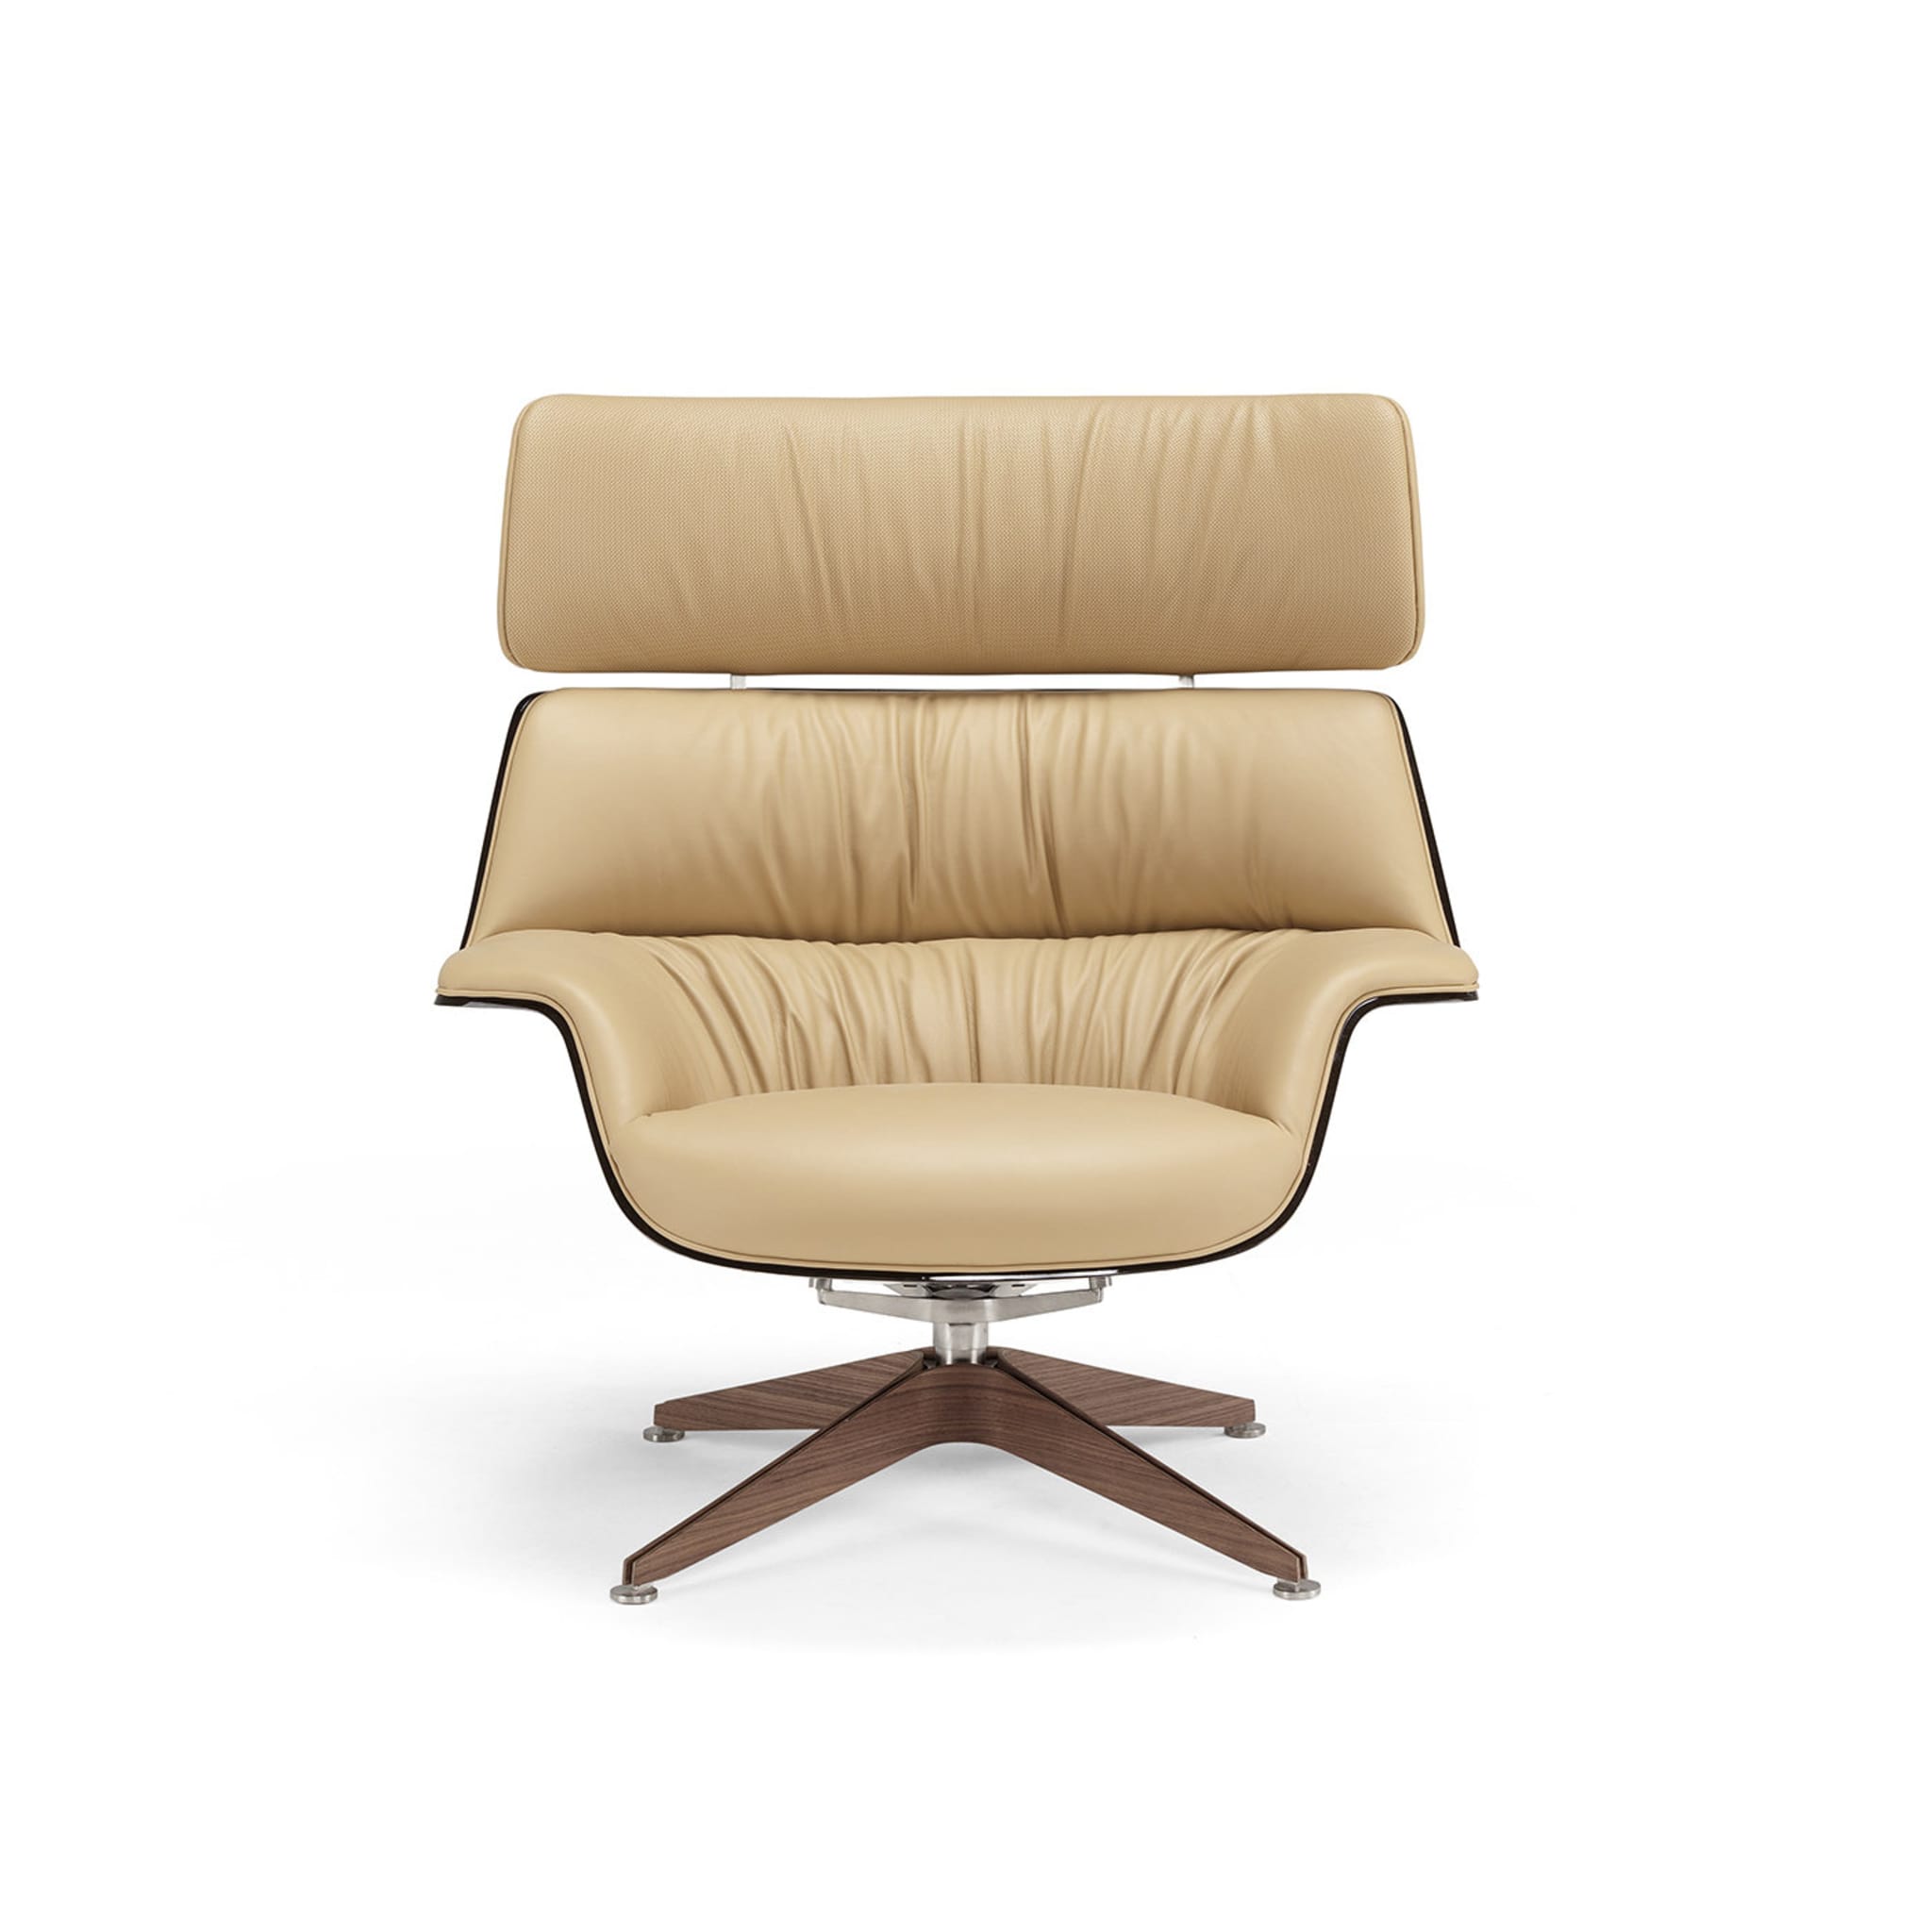 Saintluc Coach Lounge Chair and Pouf by Jean-Marie Massaud - Alternative view 1